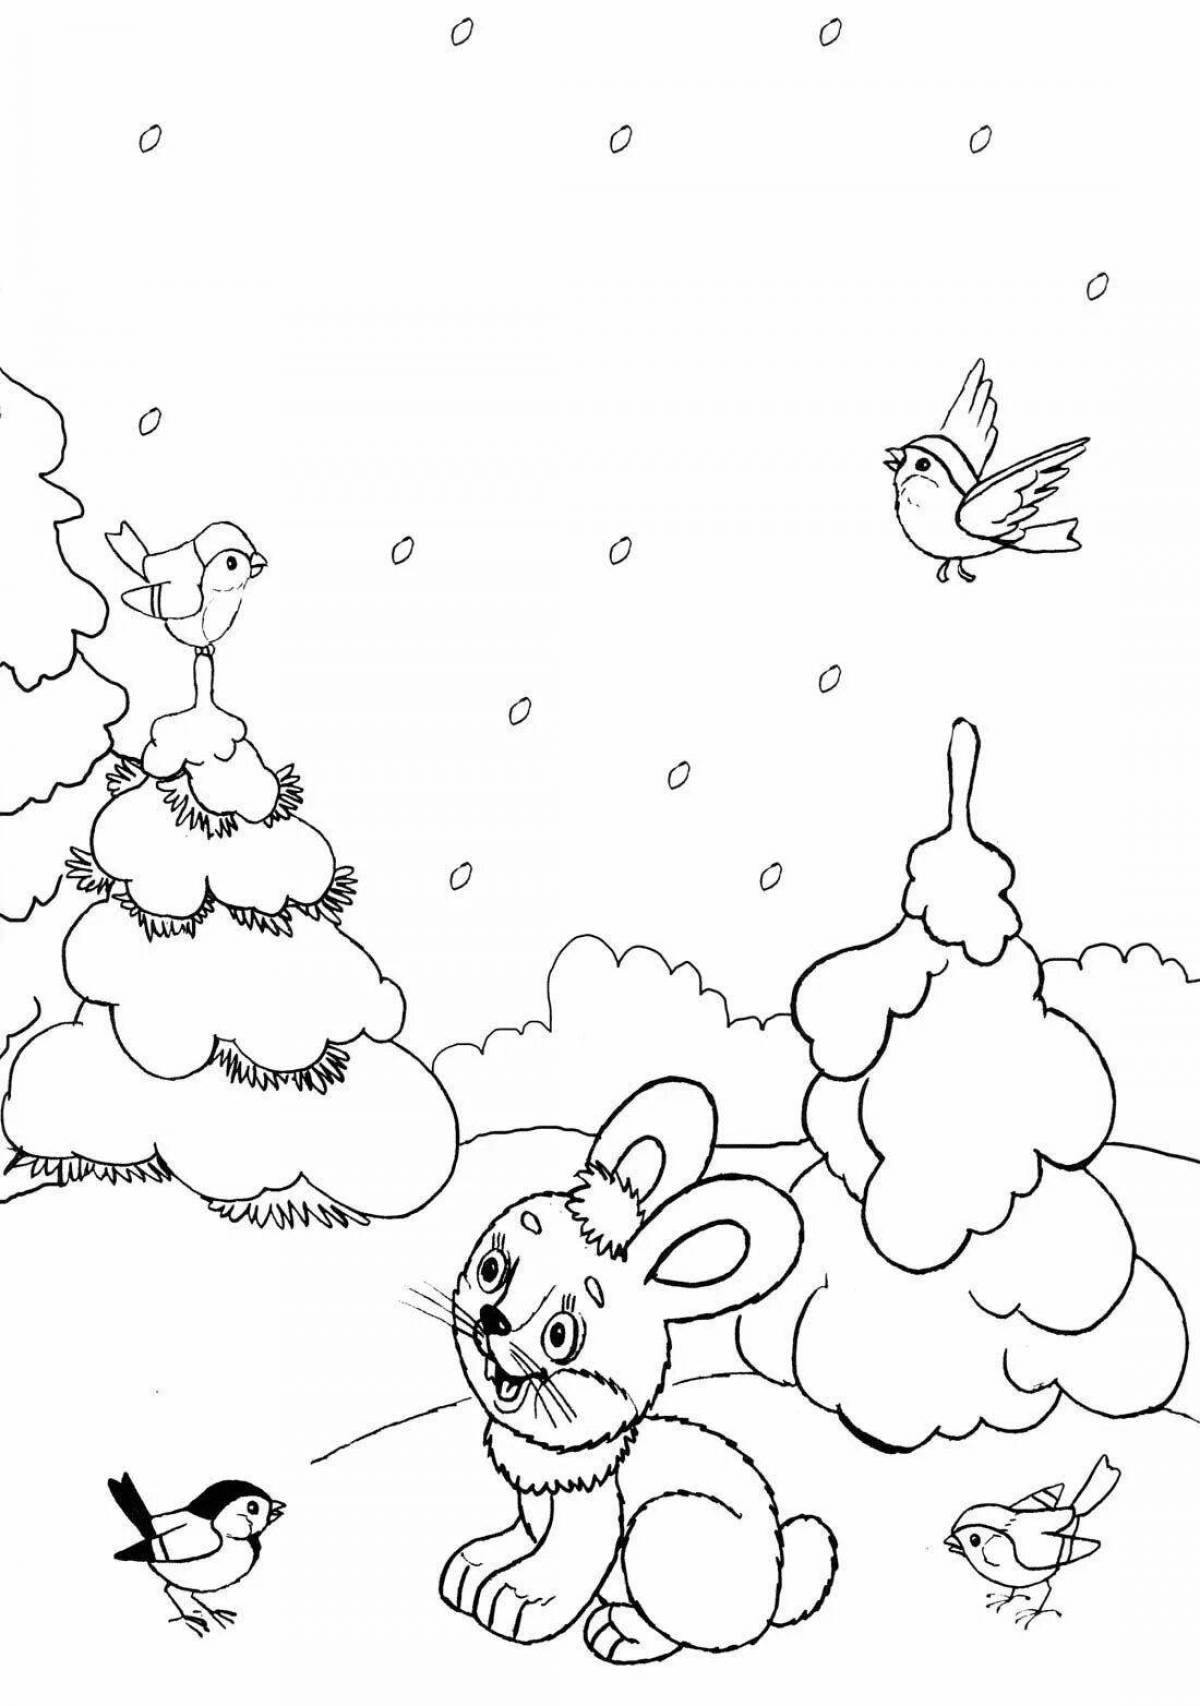 Coloring a bunny in winter